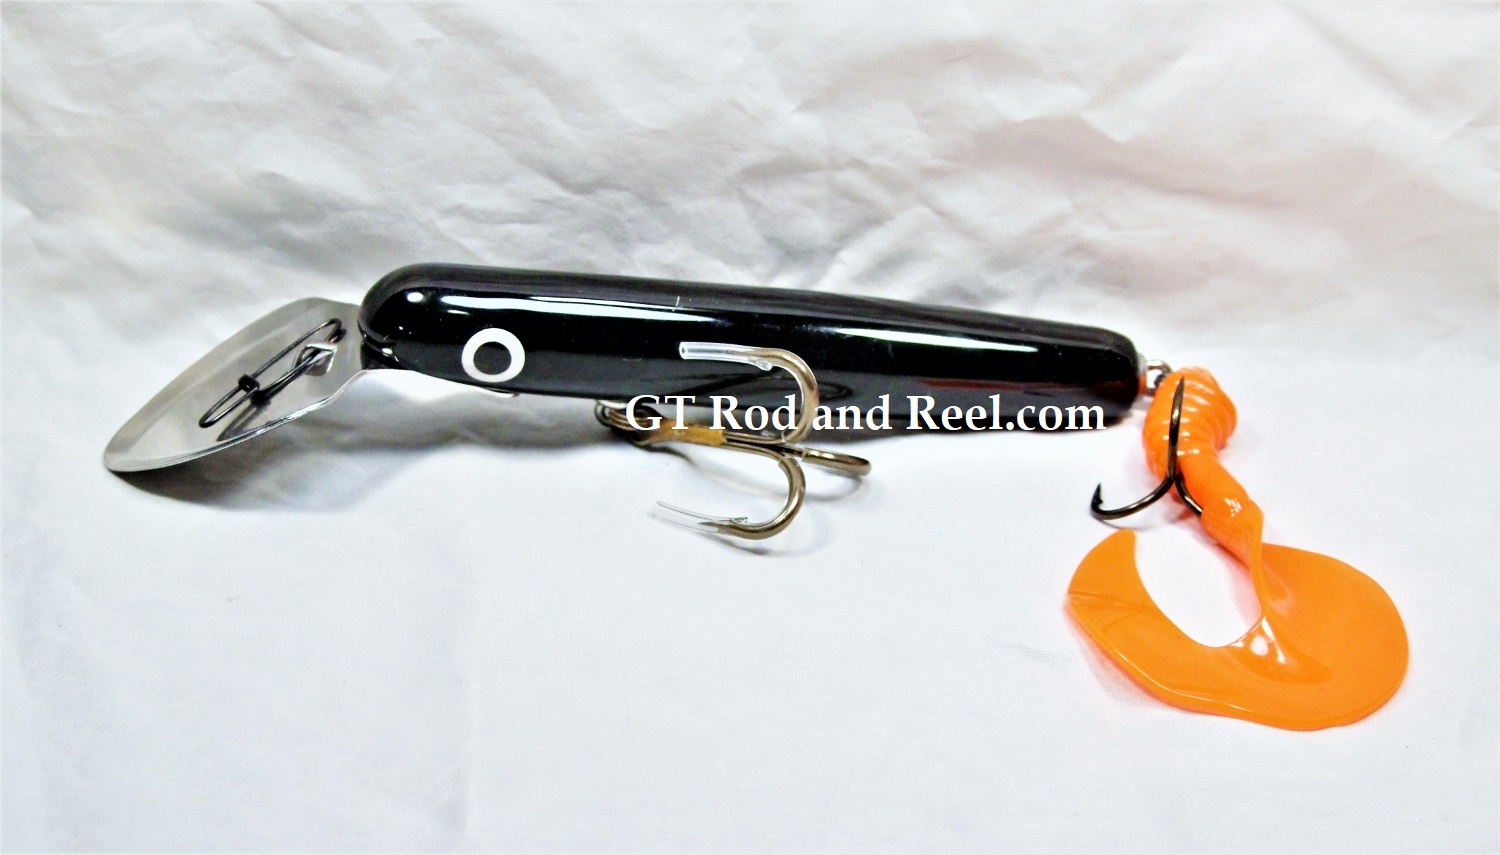 AHL Rock Diver BlackDEEP DIVING ROCK MAPLE DIVERS THIS IS HOW I GOT THE  NAME FOR AMERICAN HARDWOOD LURES AHL BACK IN THE 80'S I WAS MAKING THESE  STAINLESS STEEL LIPPED HARDWOOD